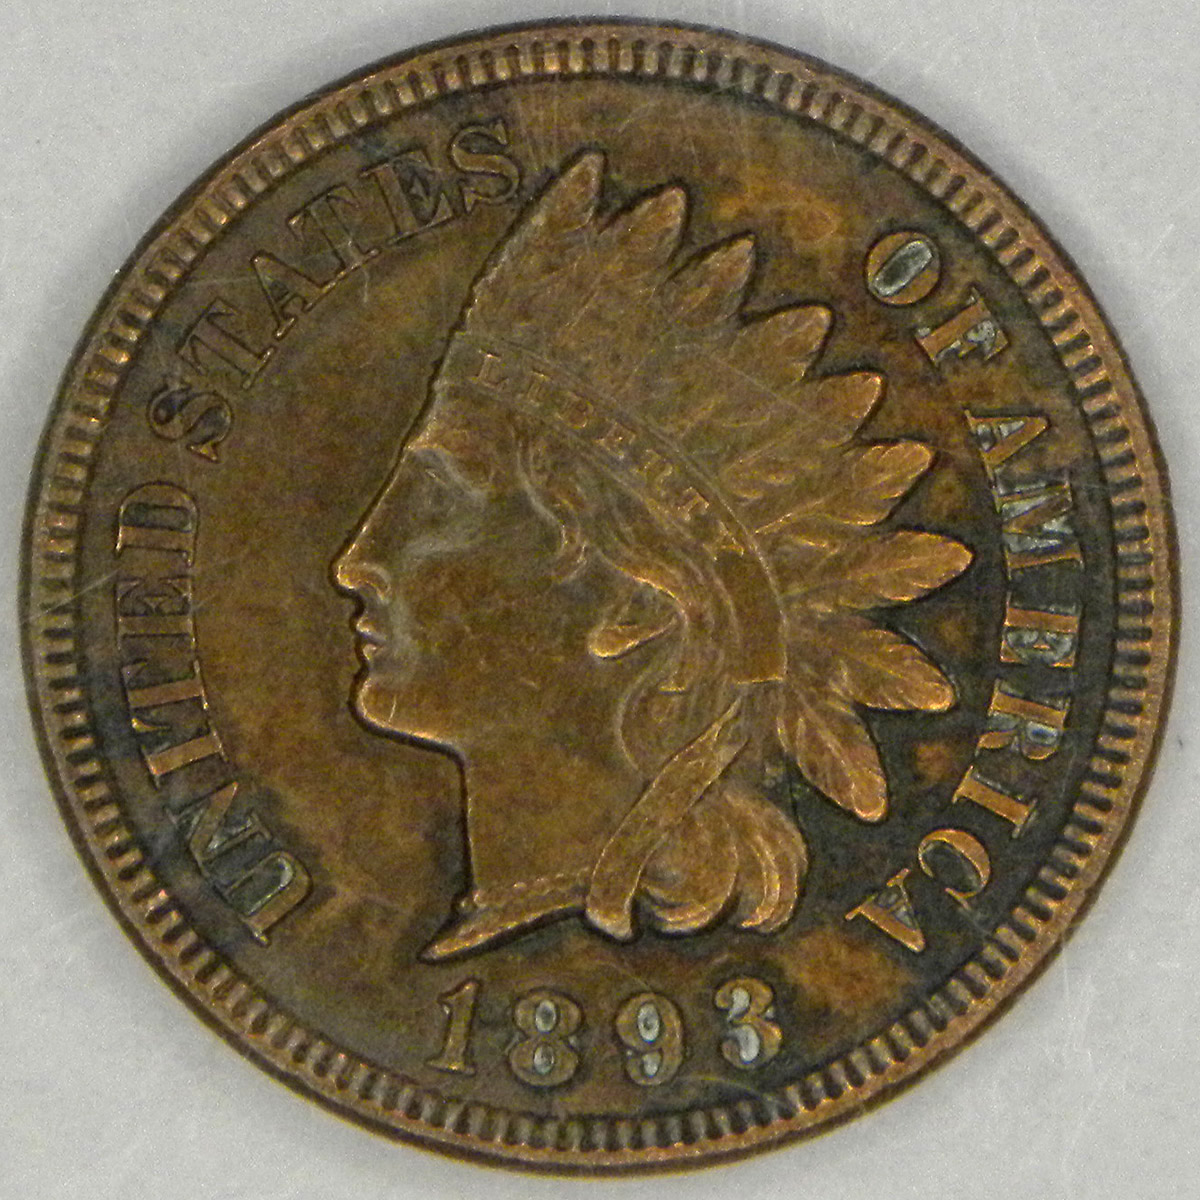 1893 Indian Head Cent (obverse)